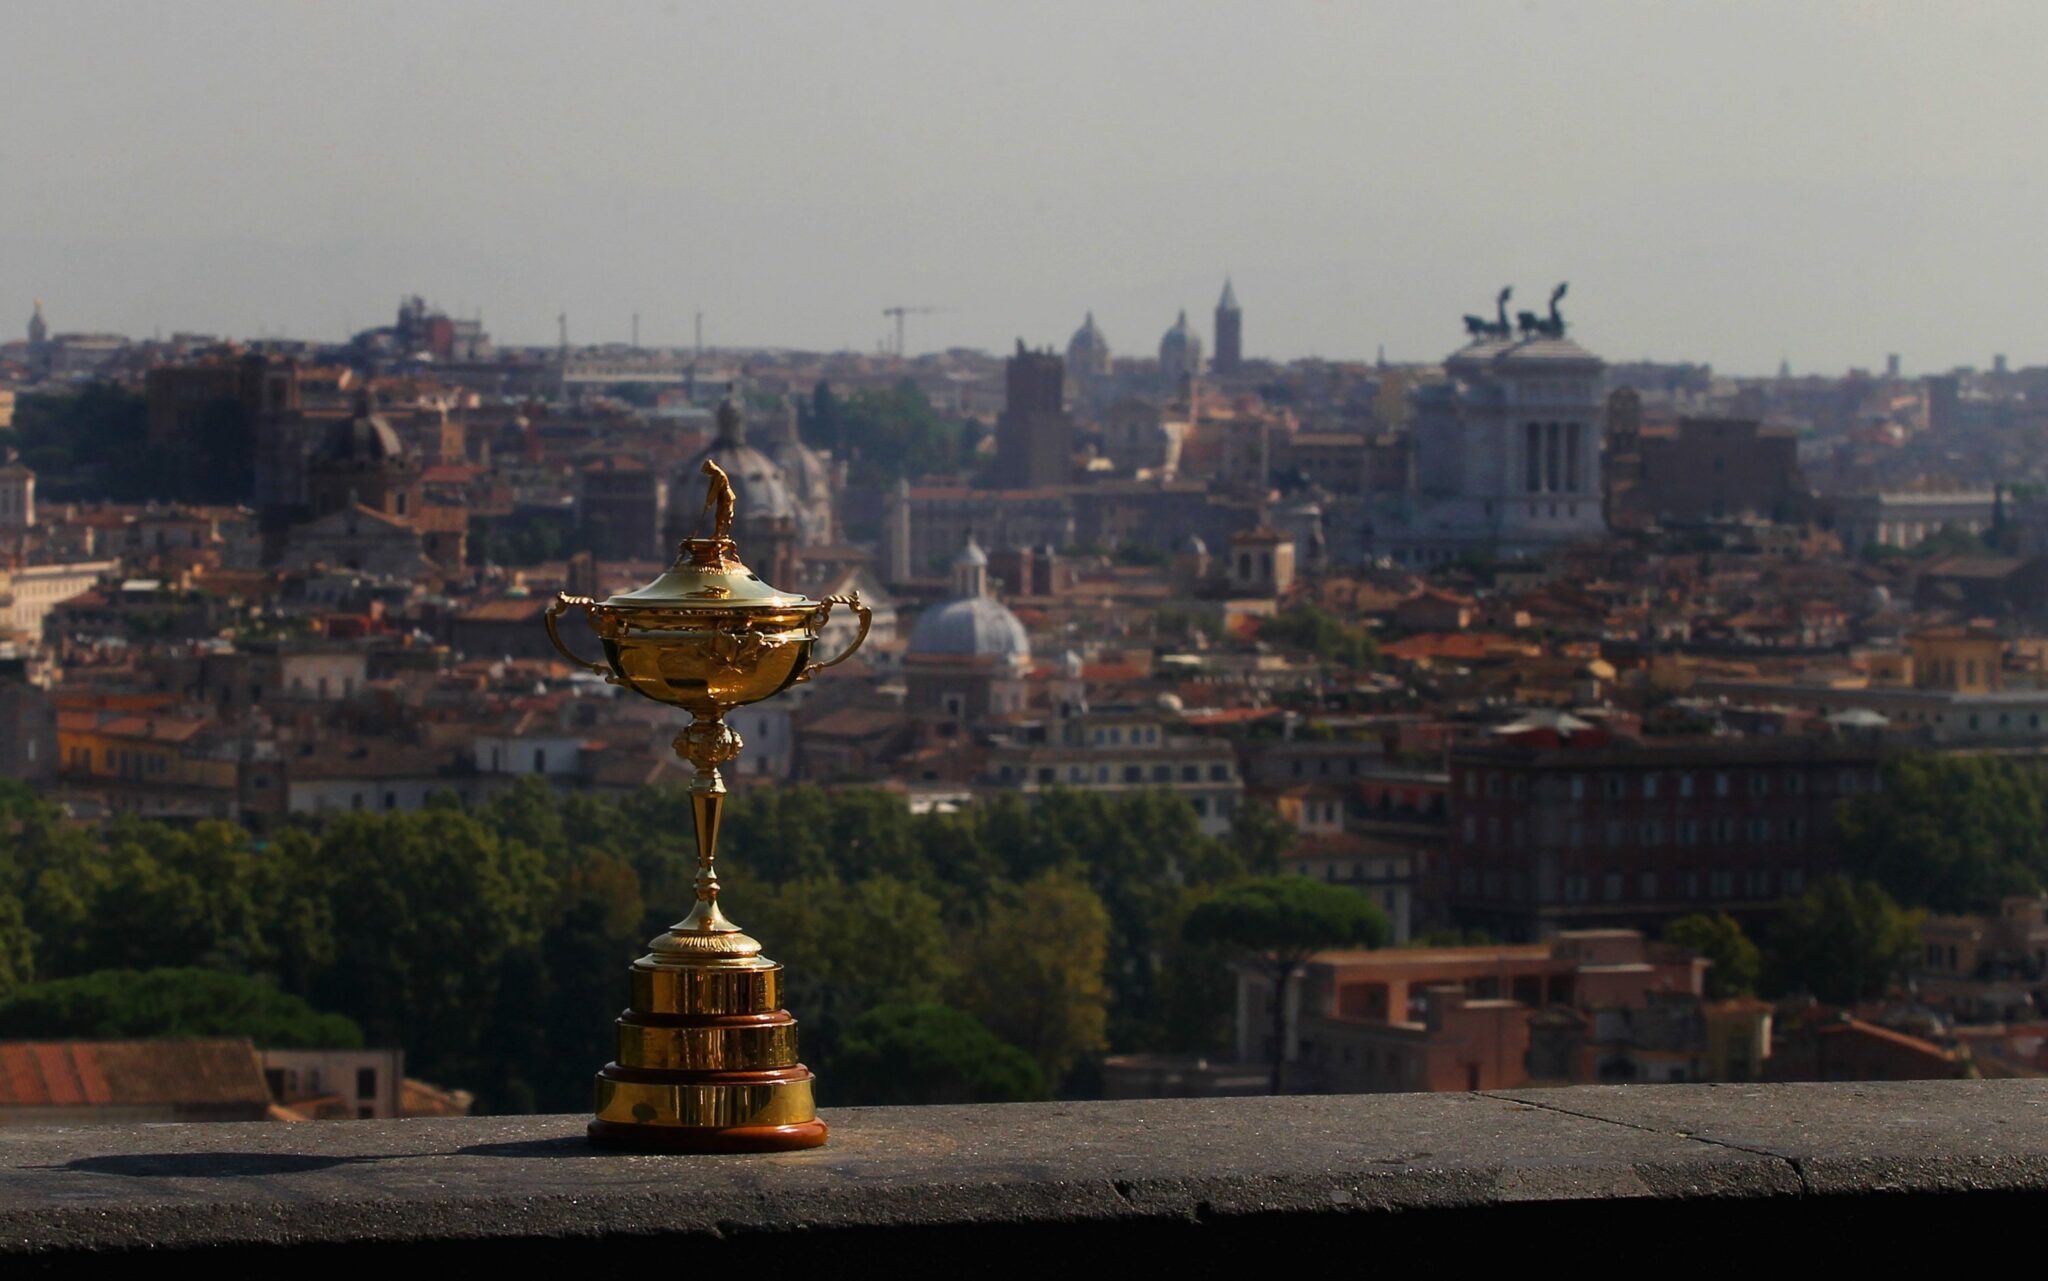 Image of the gold ryder cup place on a wall with a dusky Rome city centre in the background